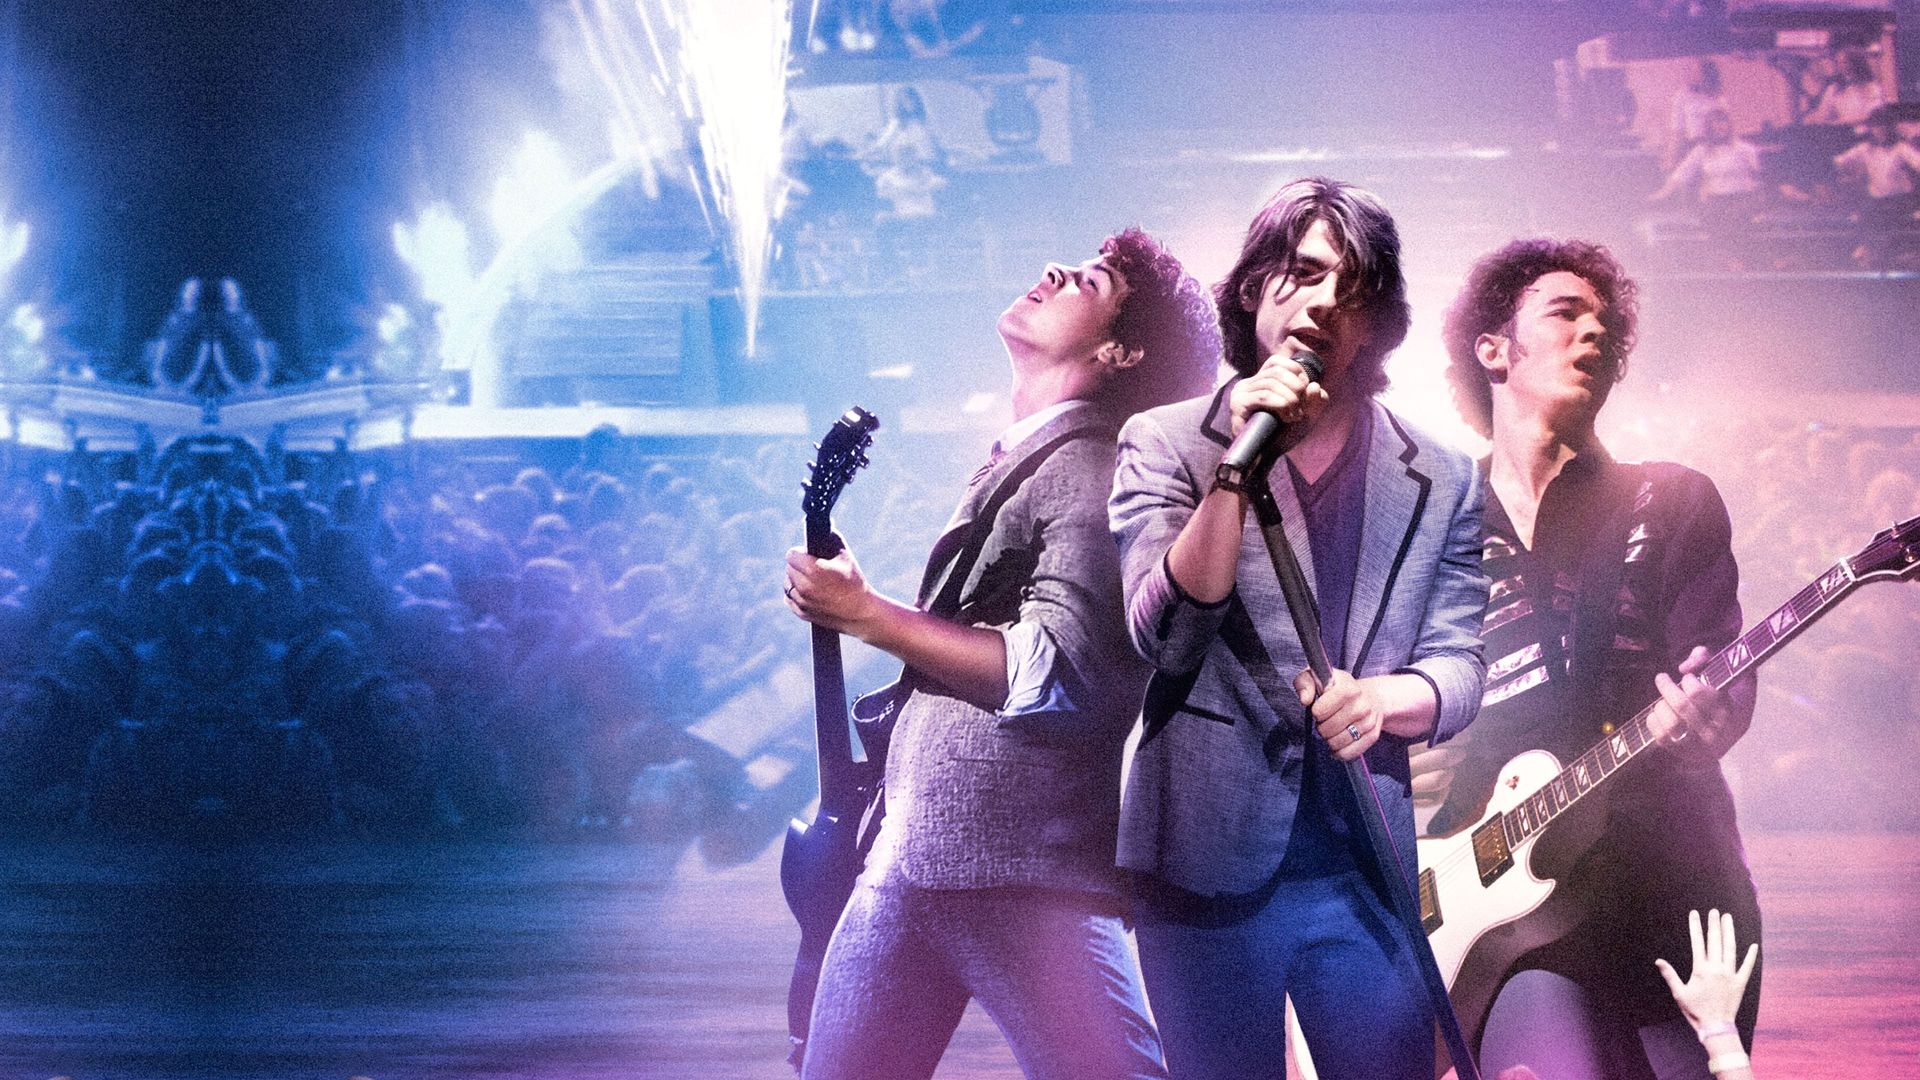 Jonas Brothers: The 3D Concert Experience background